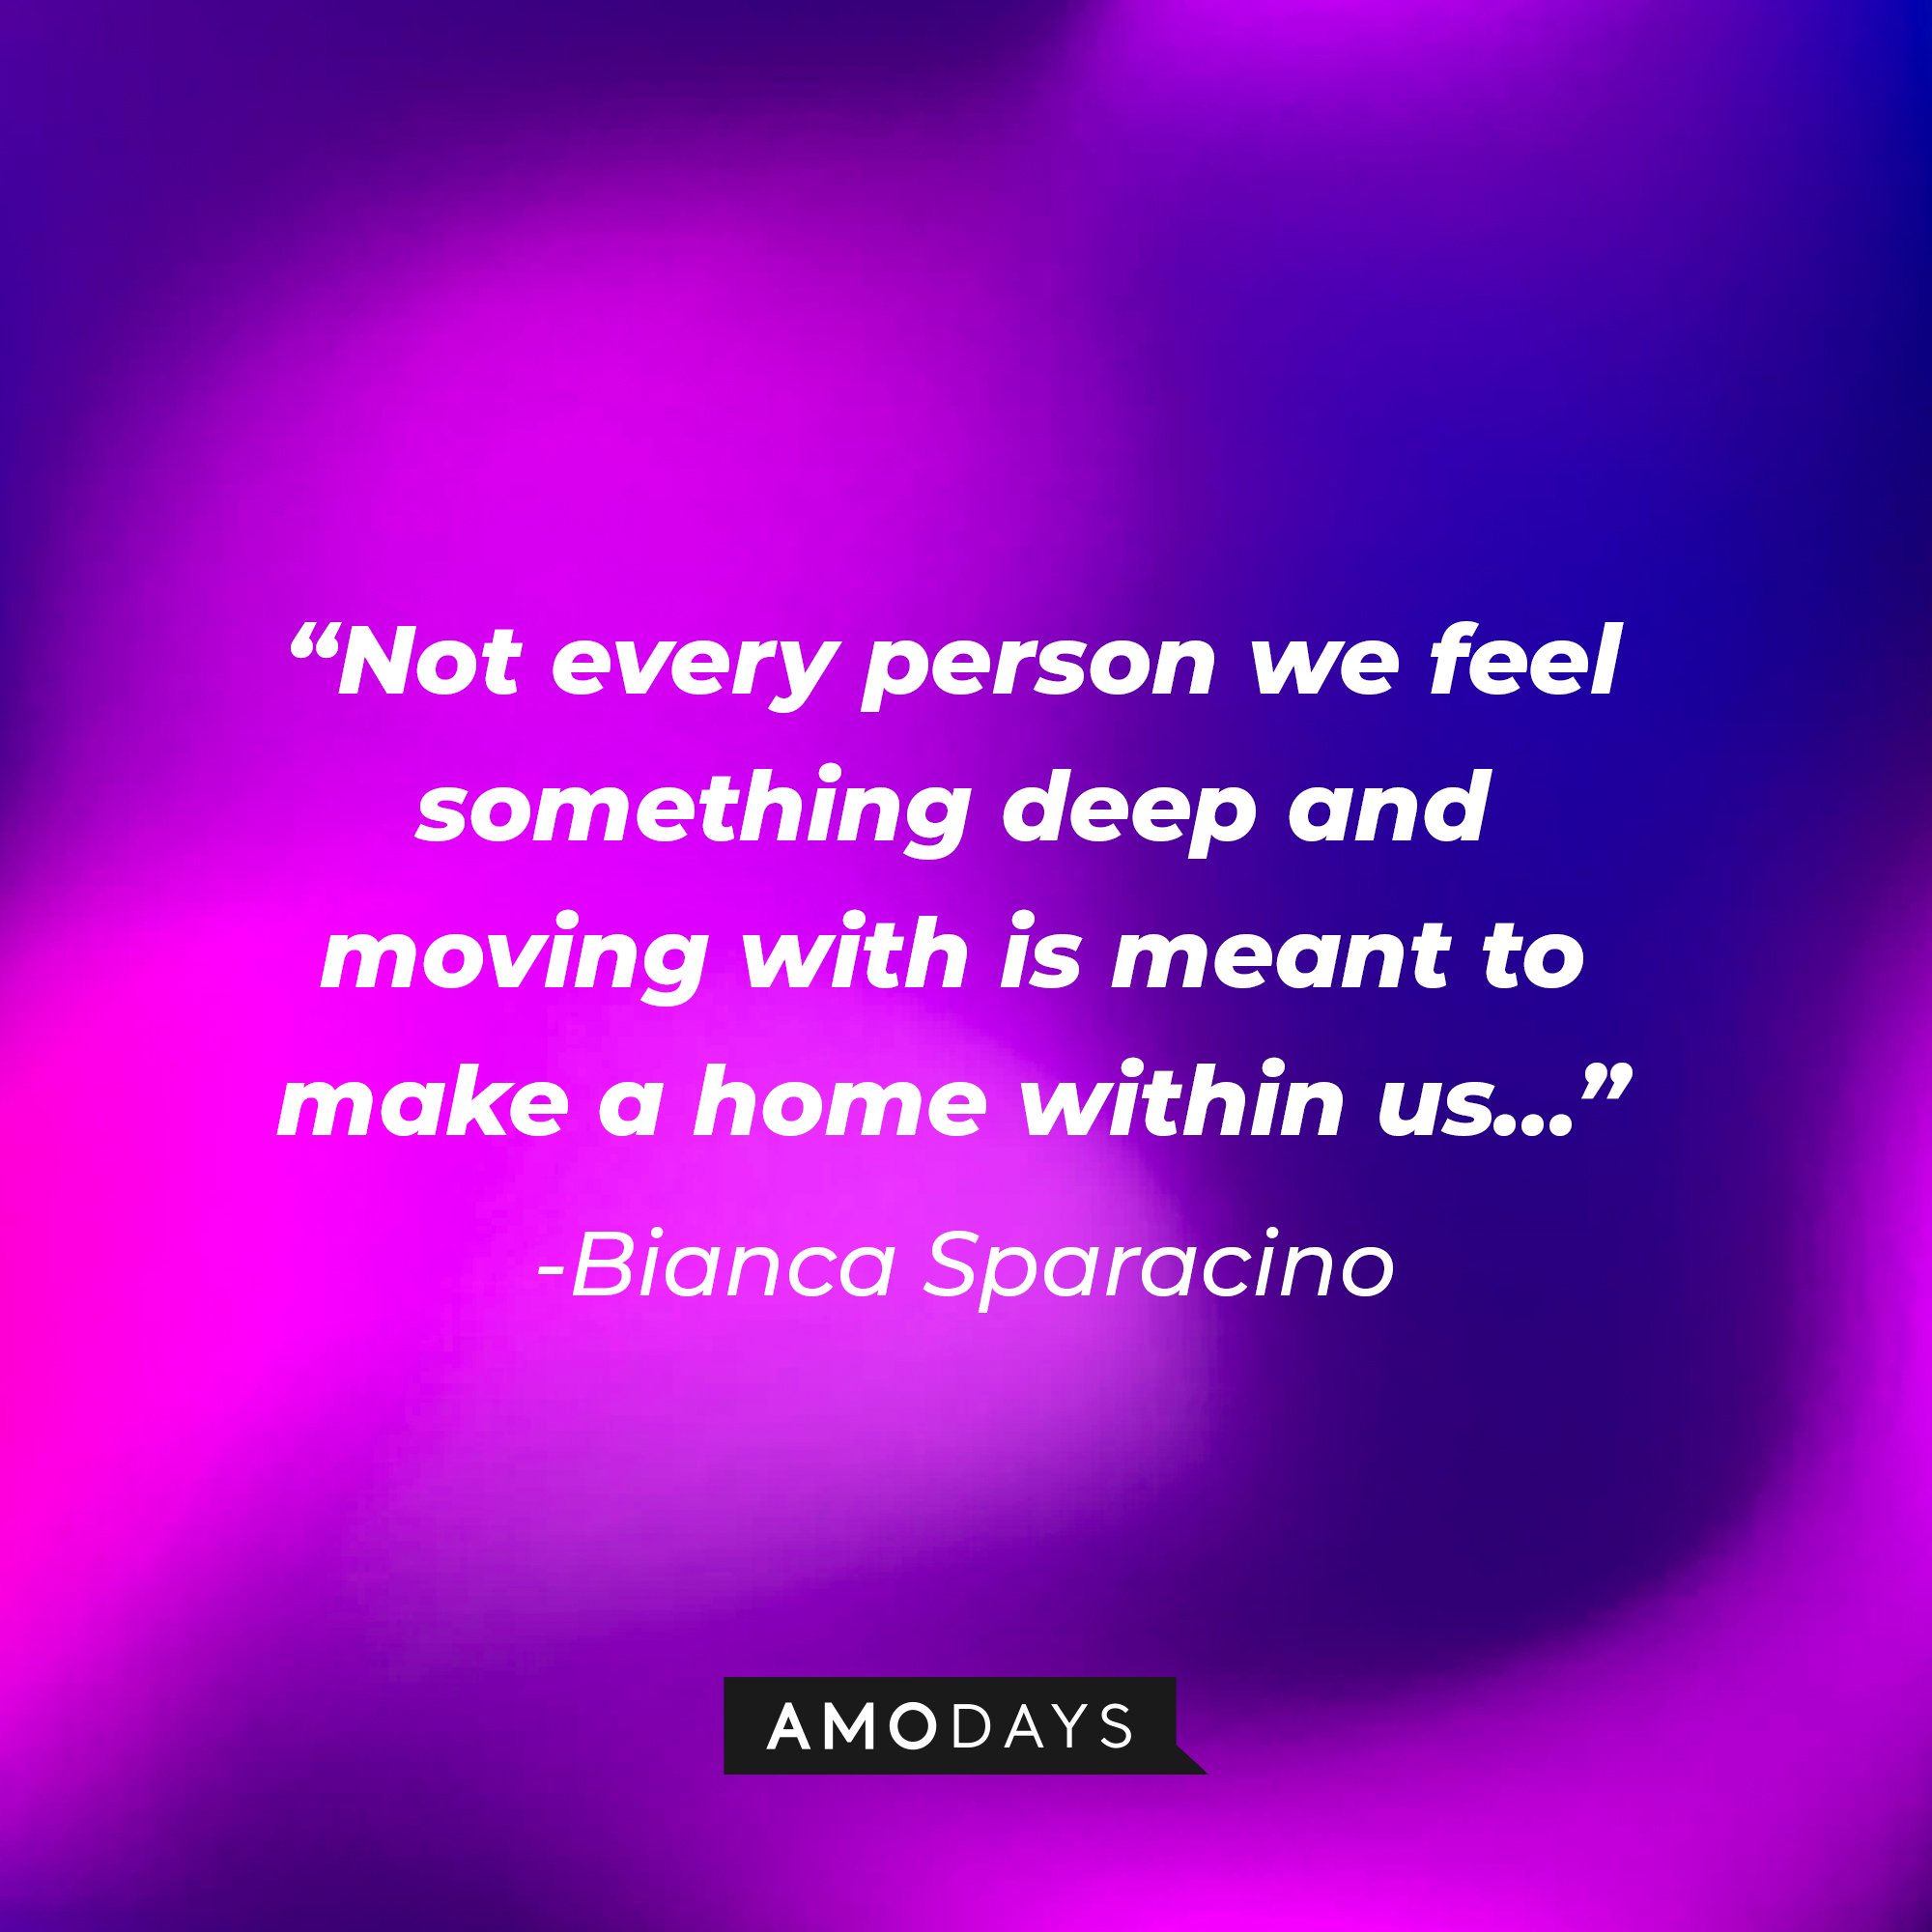 Bianca Sparacino’s quote: "Not every person we feel something deep and moving with is meant to make a home within us…" | Image: AmoDays